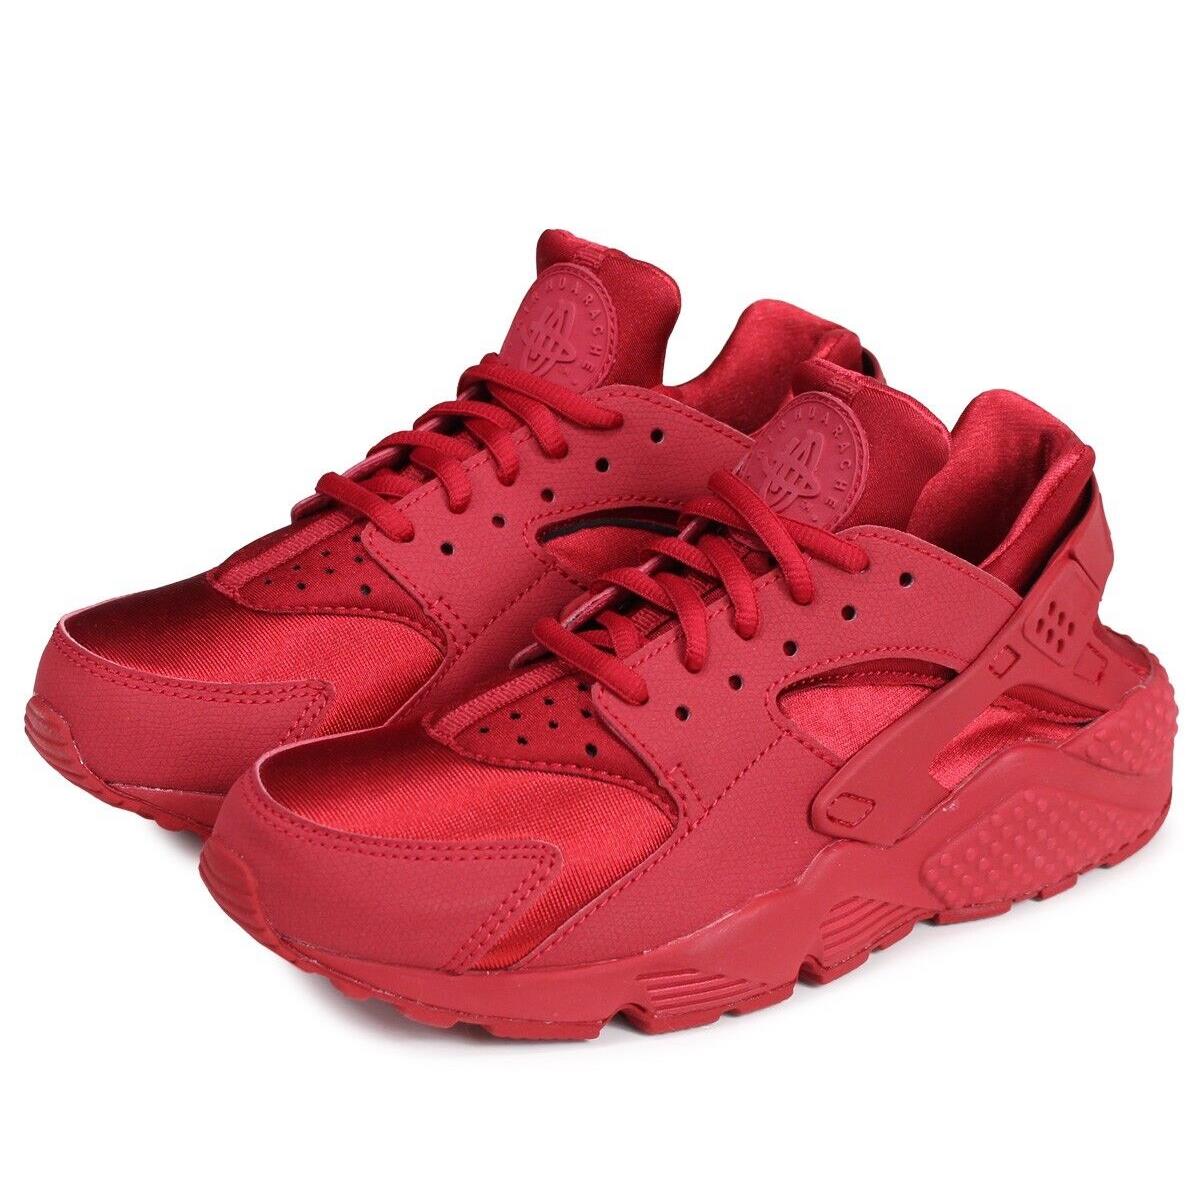 Nike Air Huarache Run Womens Size 6 Sneaker Shoes 634835 601 Red October - Red